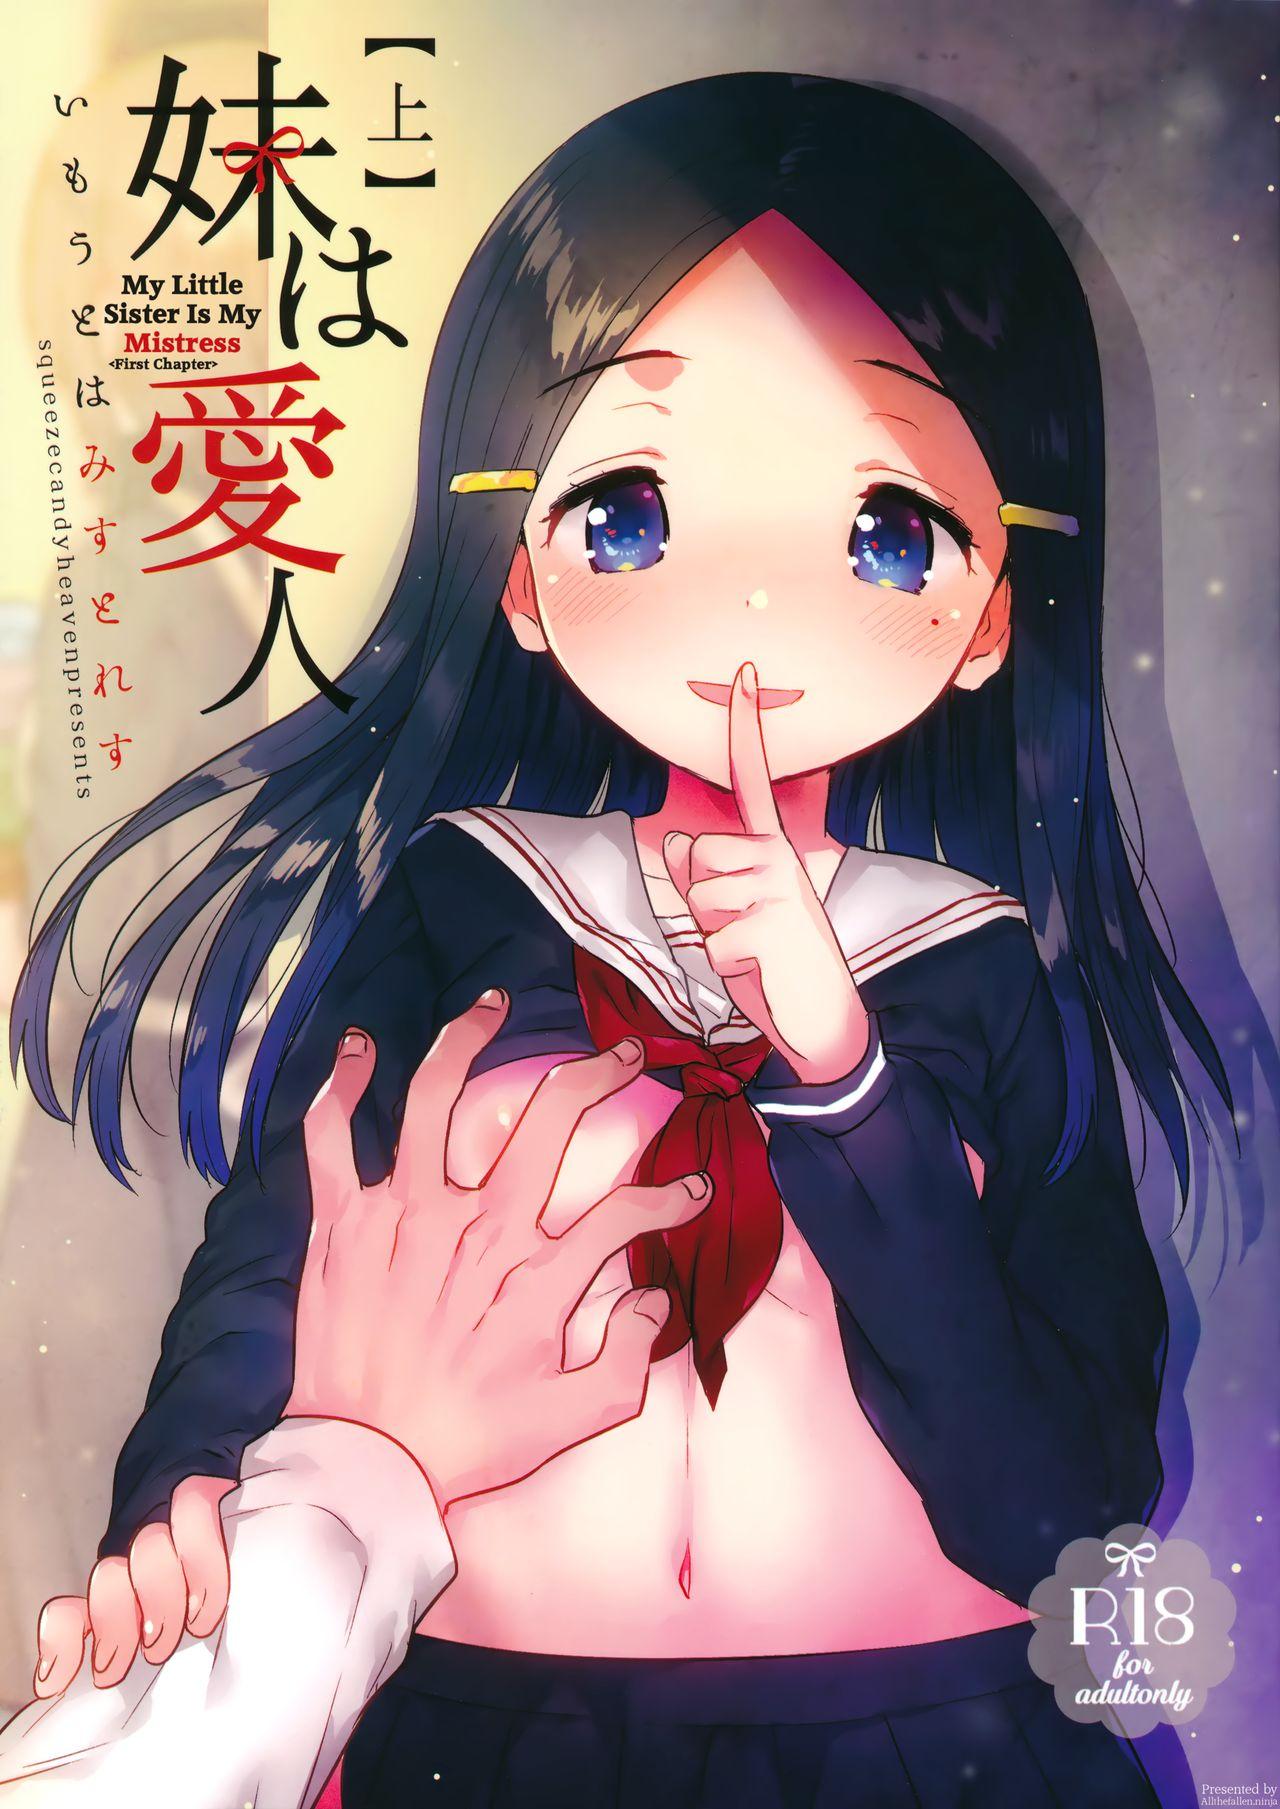 Imouto wa Mistress| My Little Sister Is My Mistress <First Chapter> 1